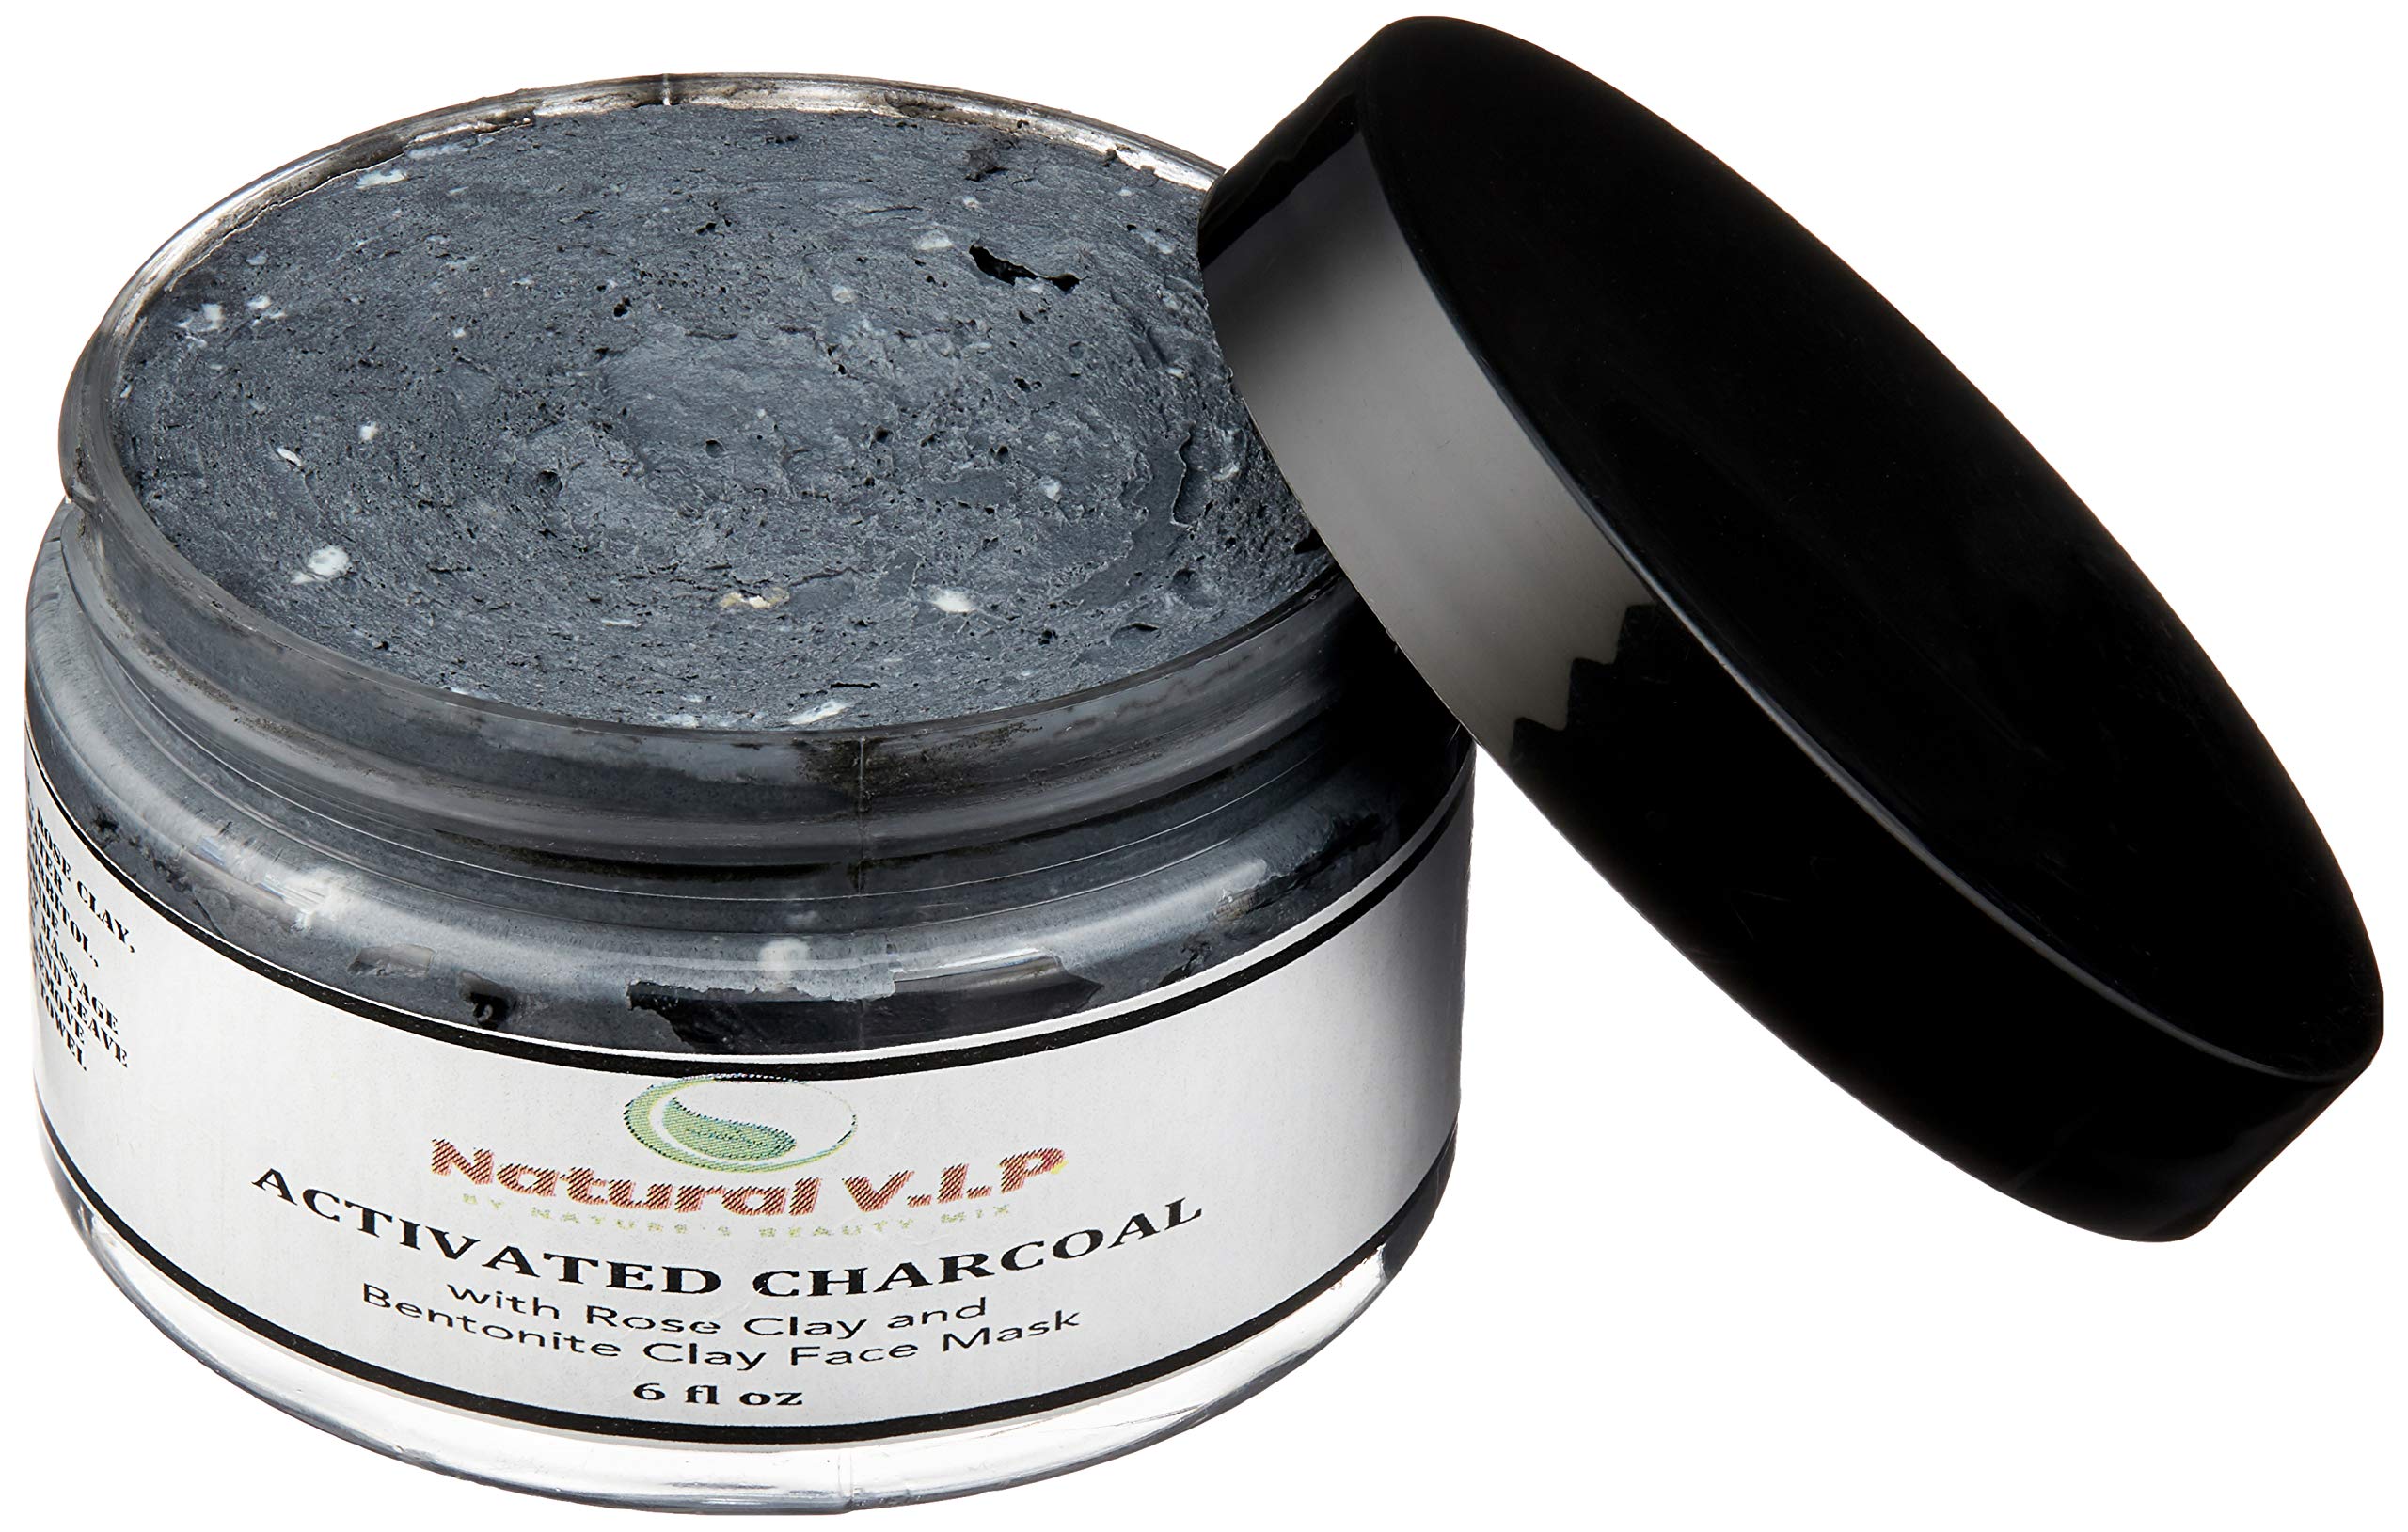 Natural V.I.P. Activated Charcoal Face Mask with Bentonite and Rose Clay and Tea Tree oil for Blackheads and Acne. Clears Complexion - Great for Dark Spots on Face.